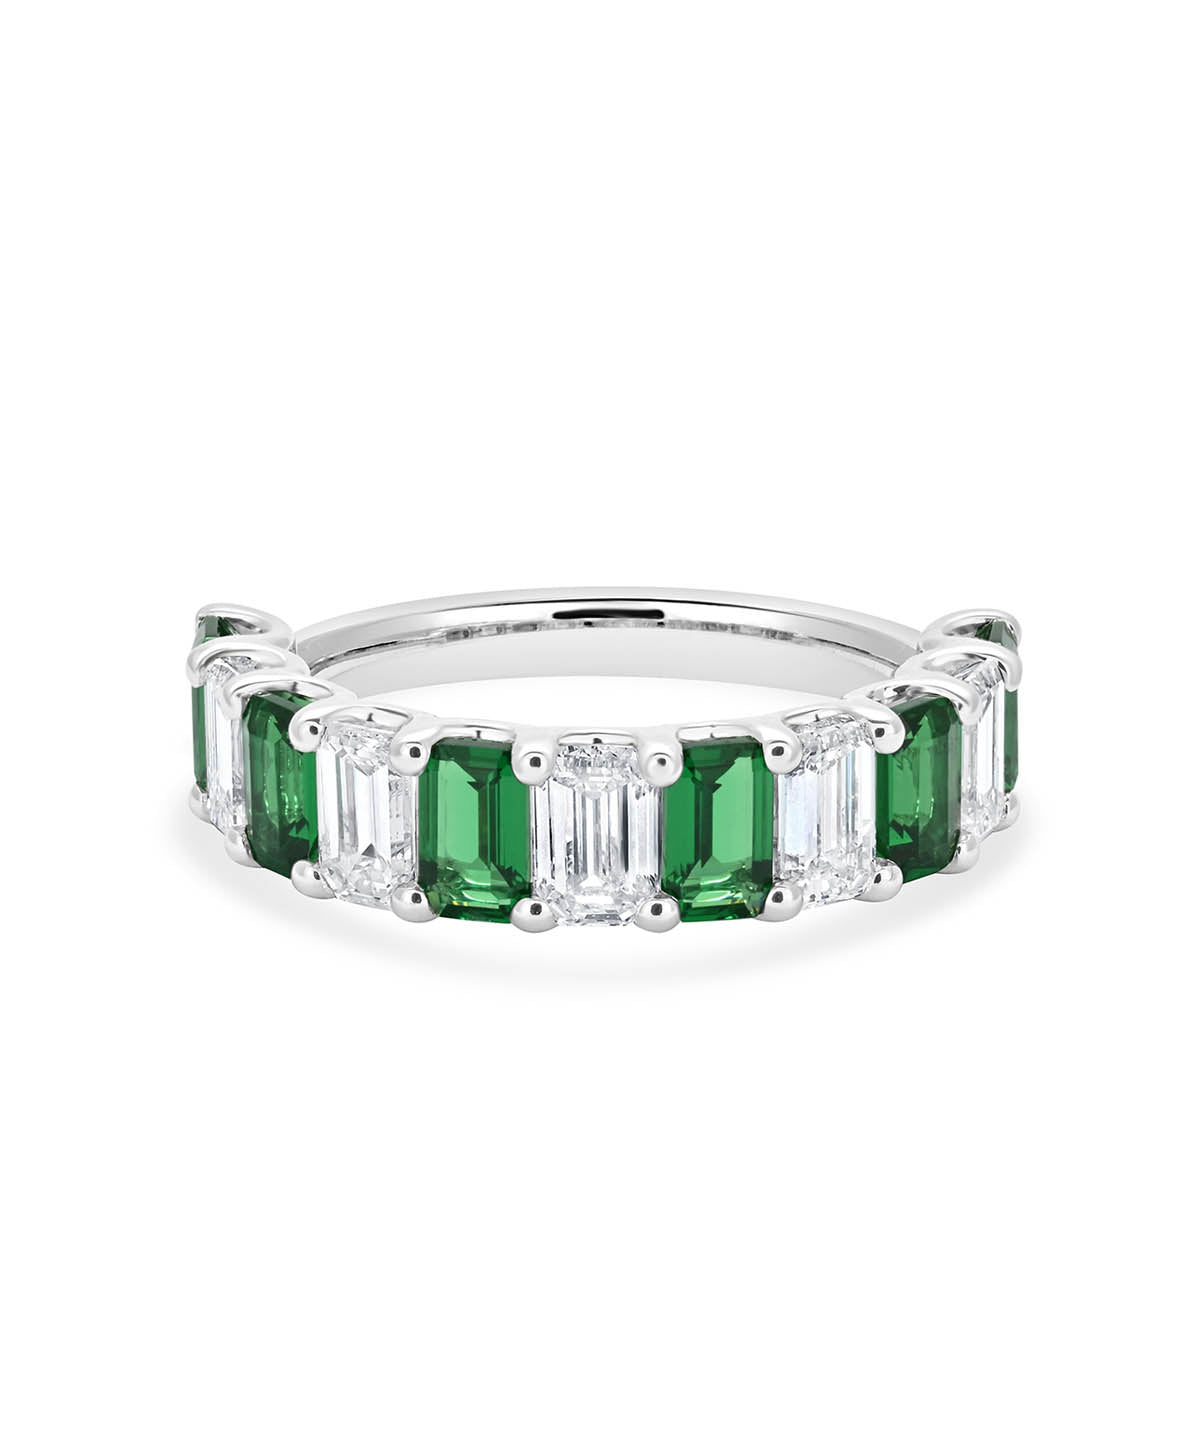 14K White Gold Lab Grown Emerald Cut Diamond and Emerald Band Ring